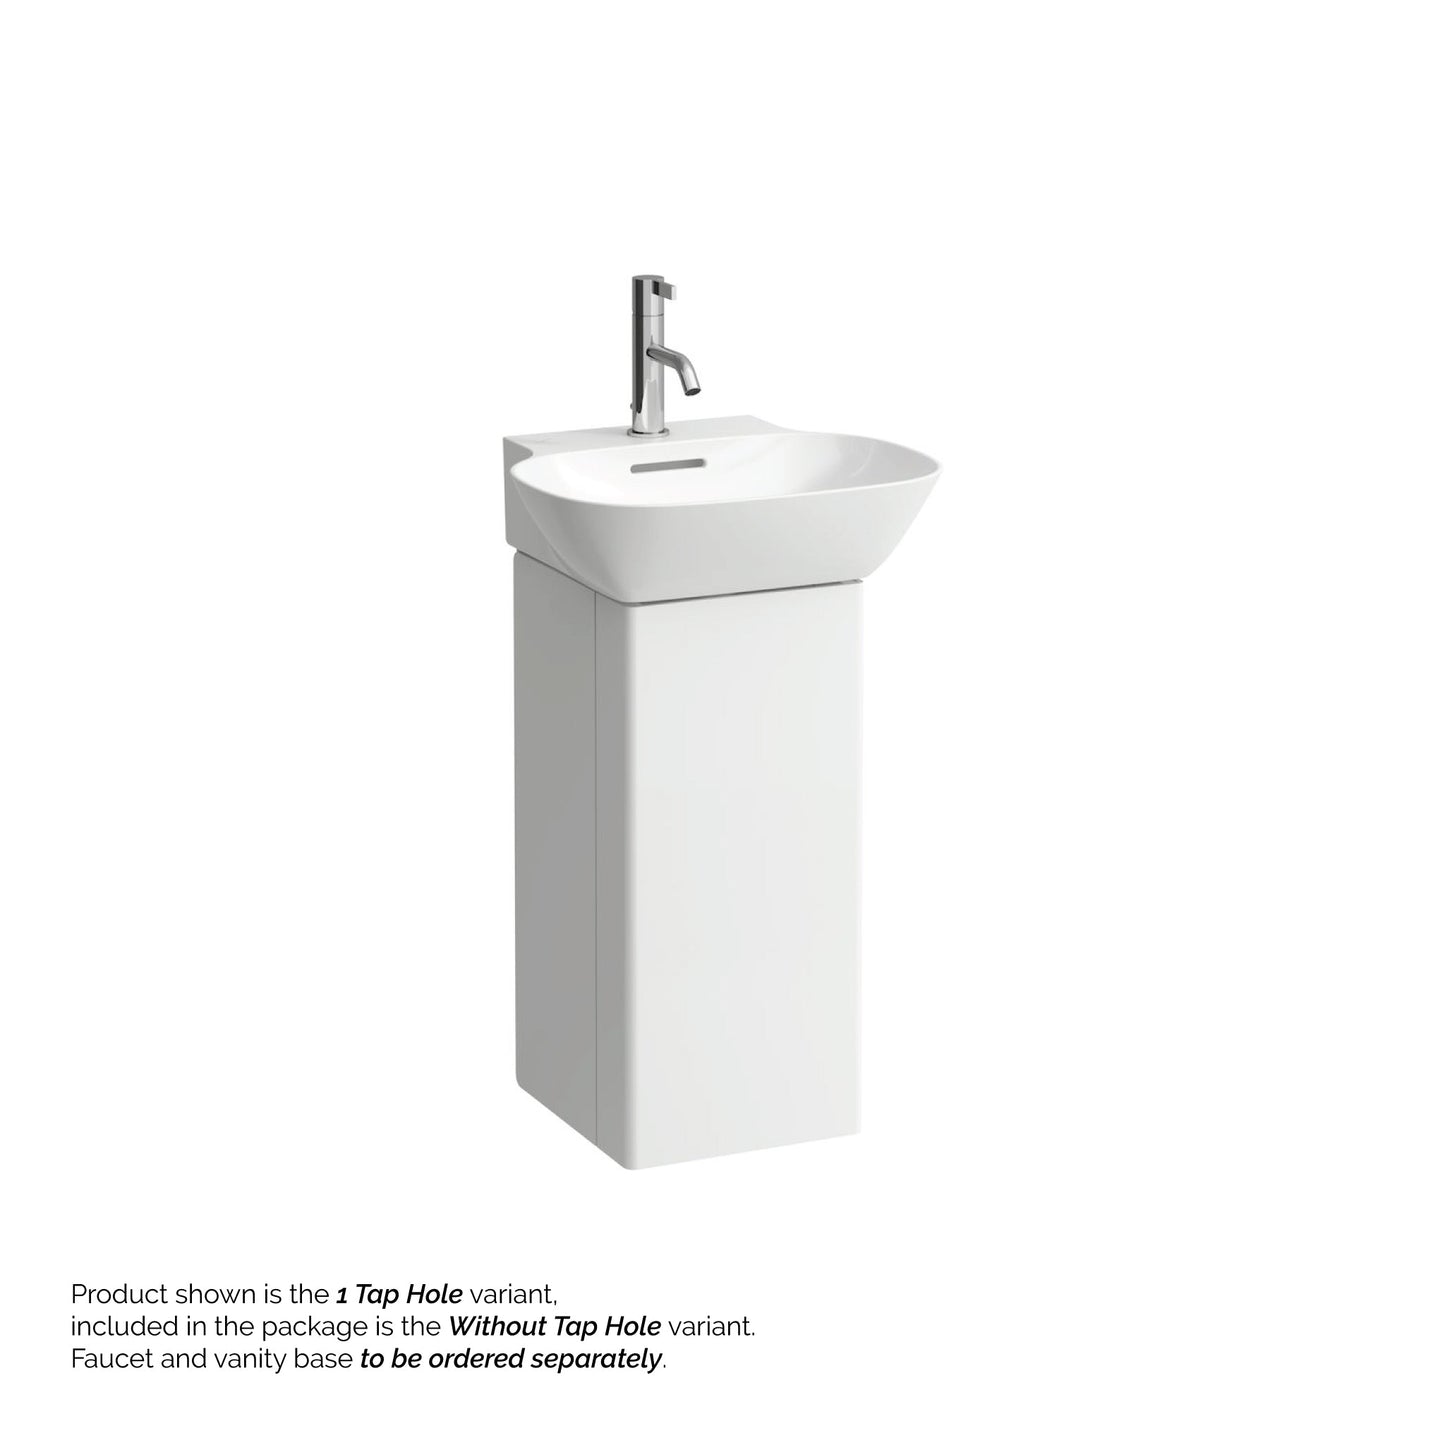 Laufen Ino 18" x 16" Rectangular White Wall-Mounted Bathroom Sink Without Faucet Hole